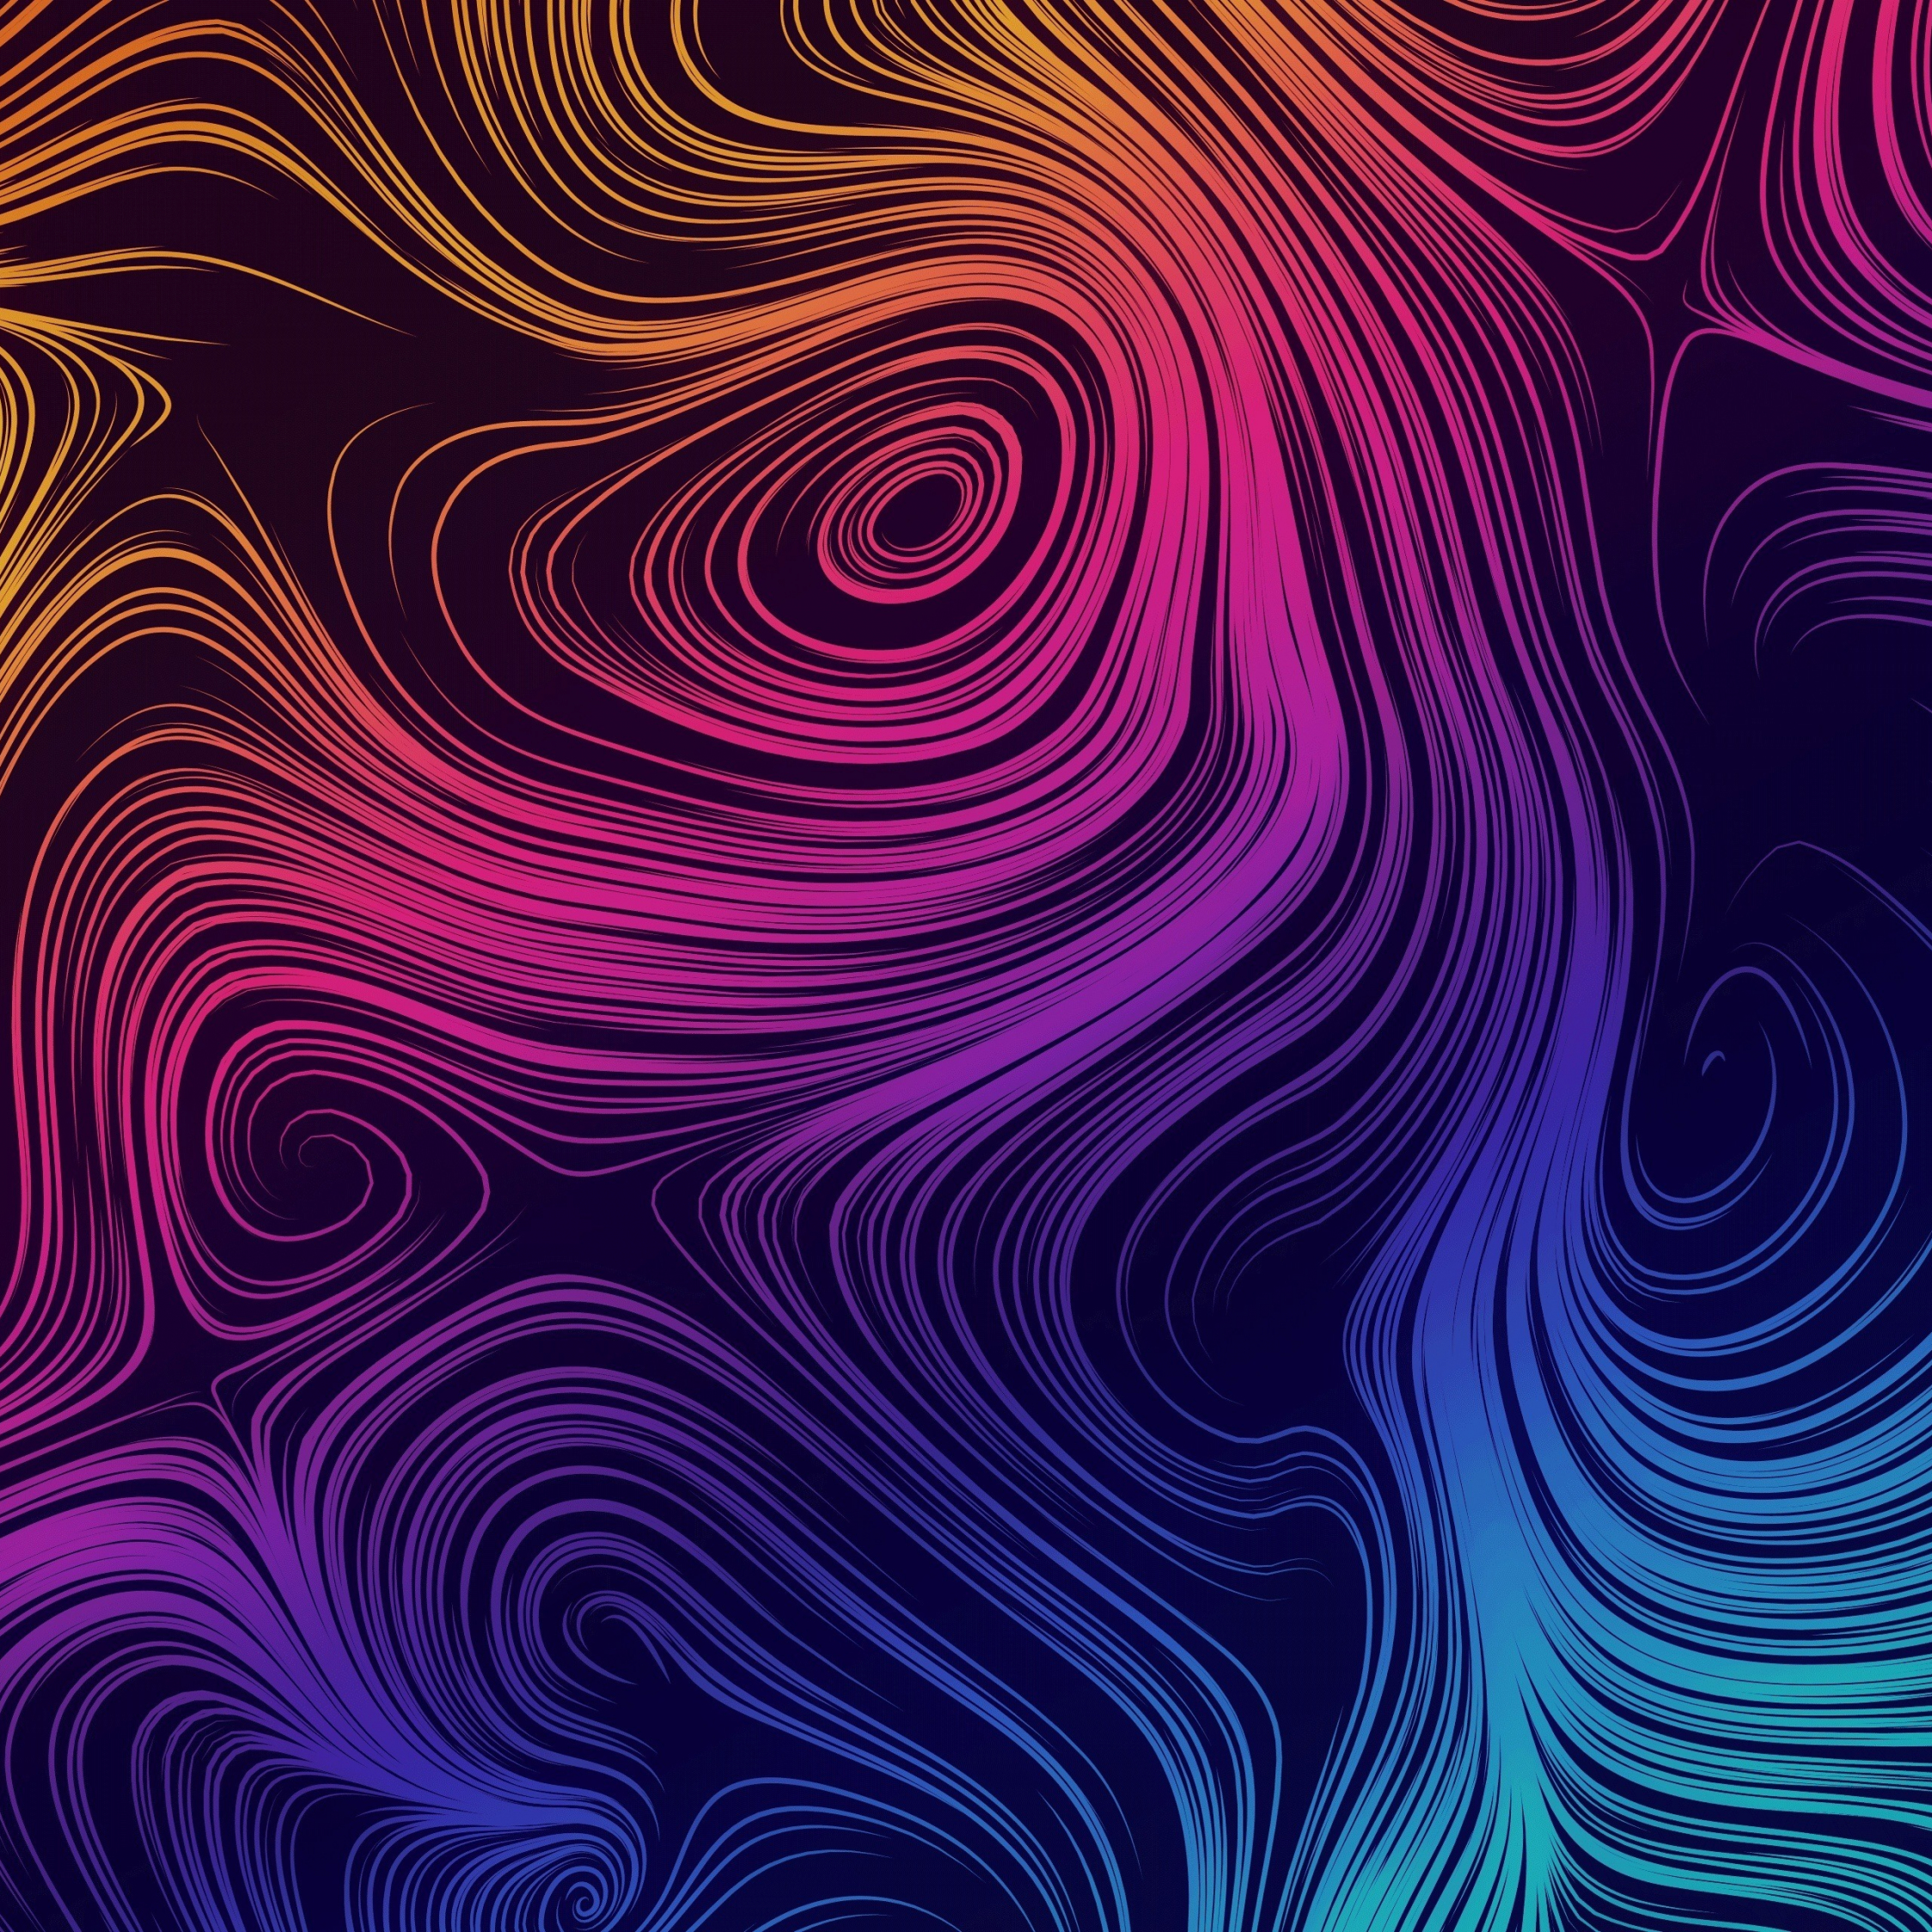 Download abstract, pattern, curvy lines 2248x2248 wallpaper, ipad air